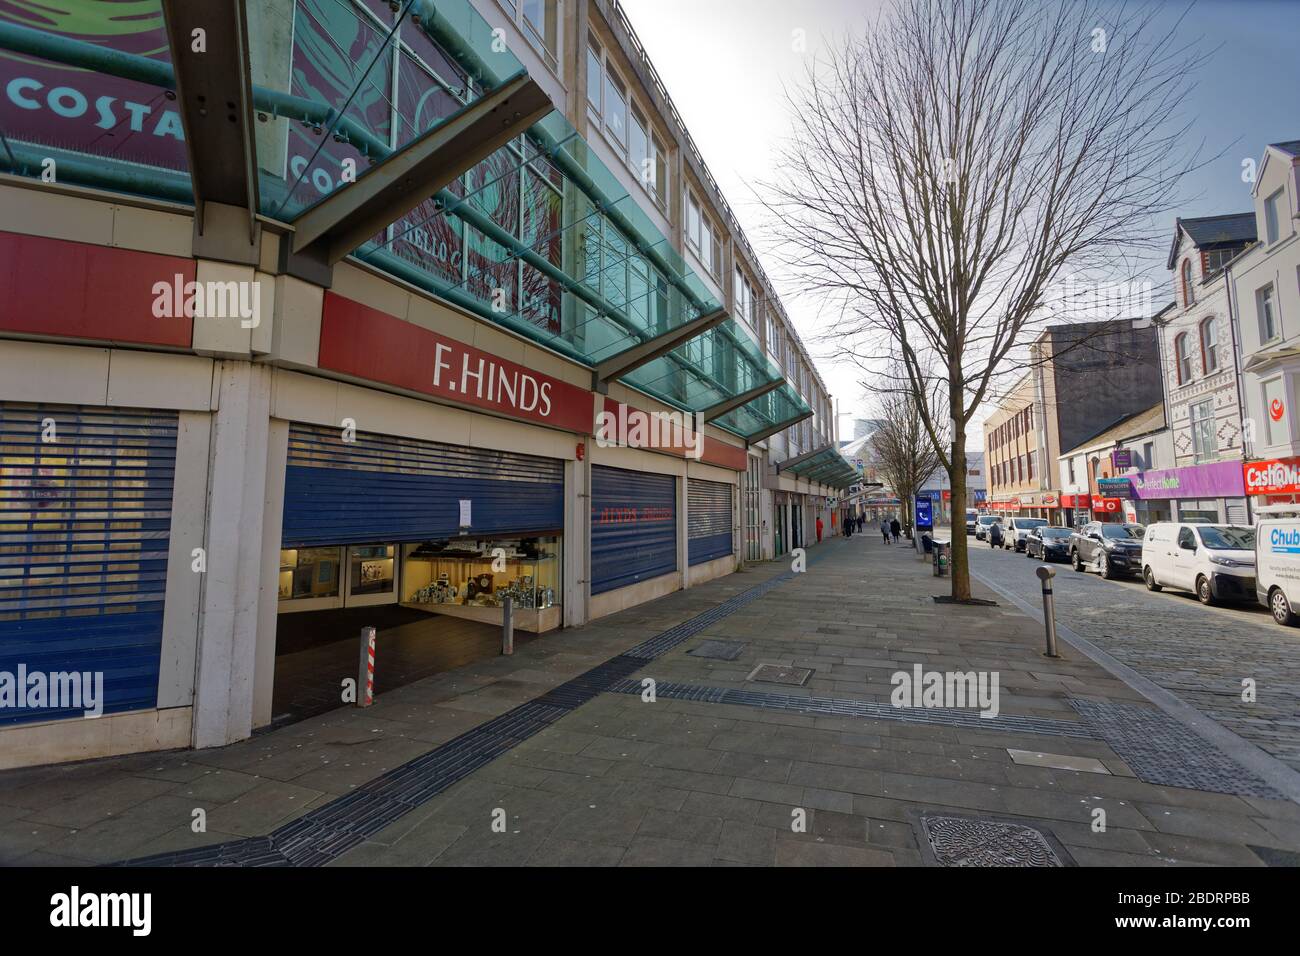 Pictured: Union Street in the deserted Swansea city centre, Wales, UK. Tuesday 24 March 2020 Re: Covid-19 Coronavirus pandemic, UK. Stock Photo